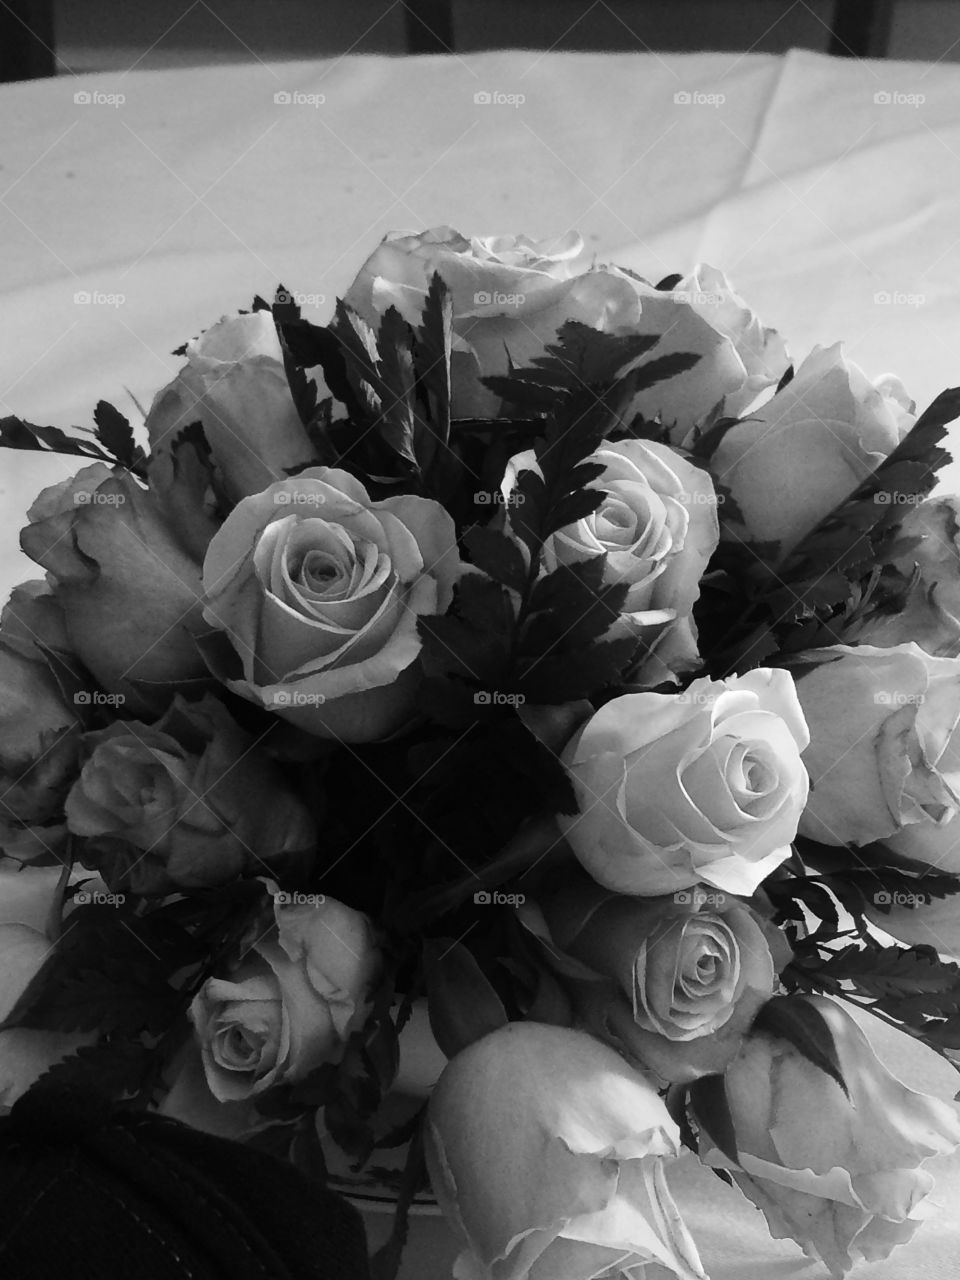 Grey scale roses 